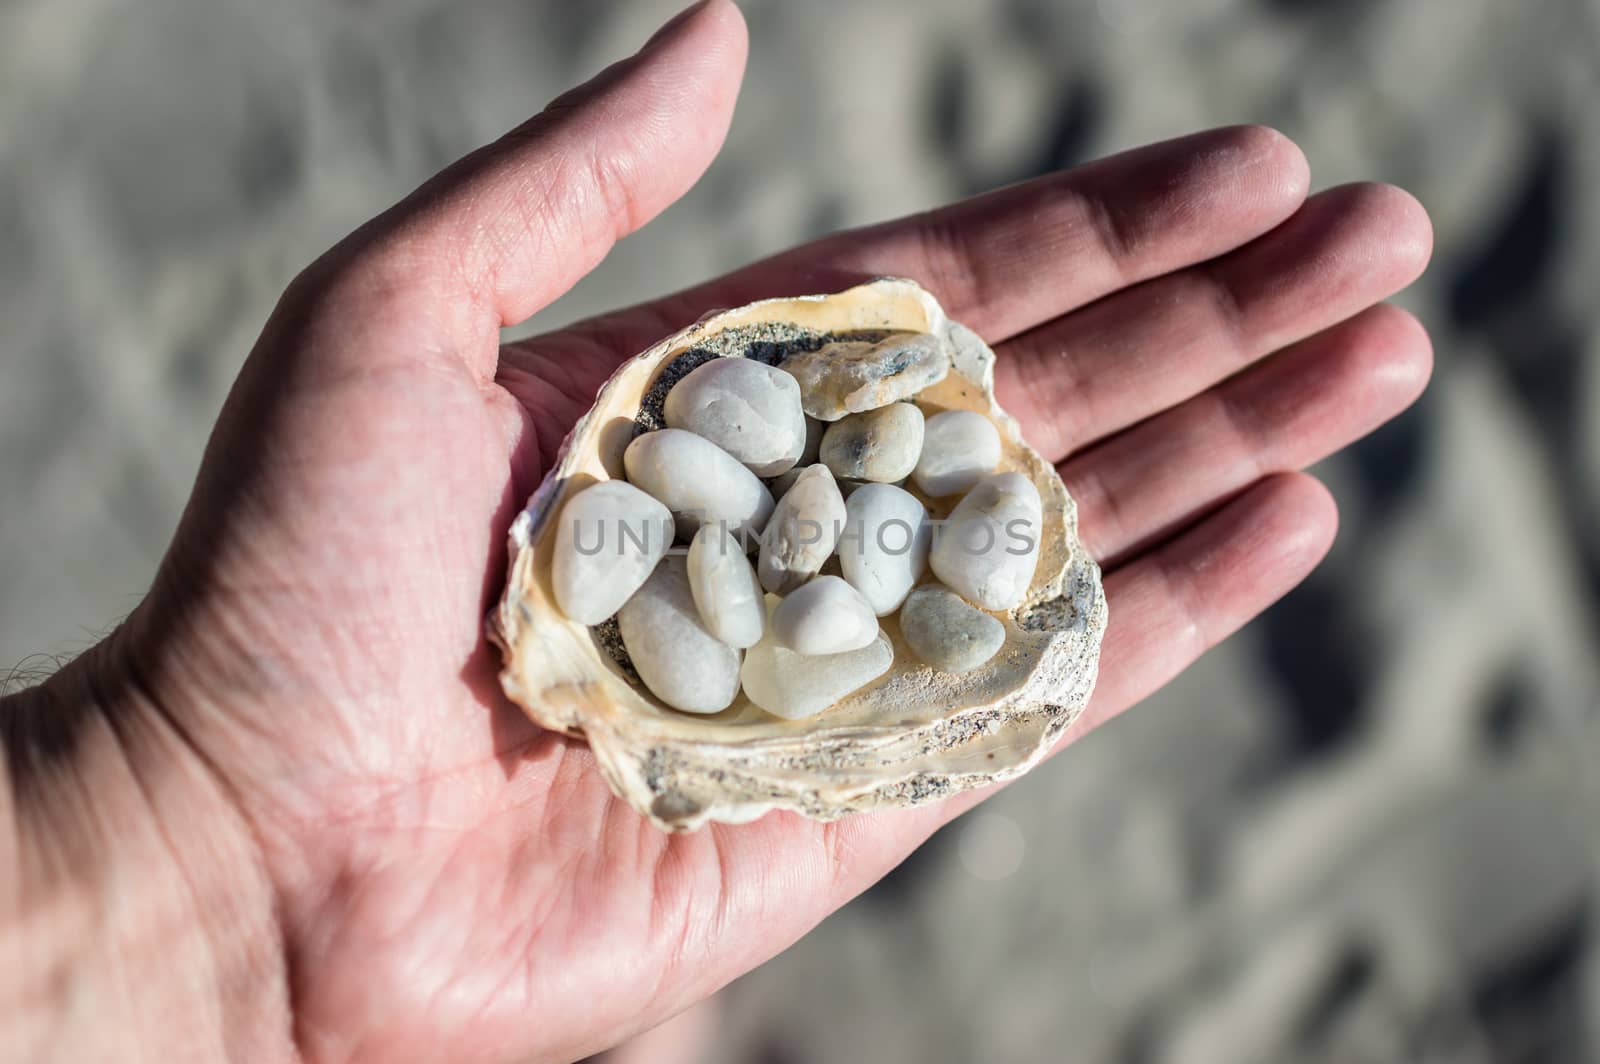 Pebbles in the shell on a hand